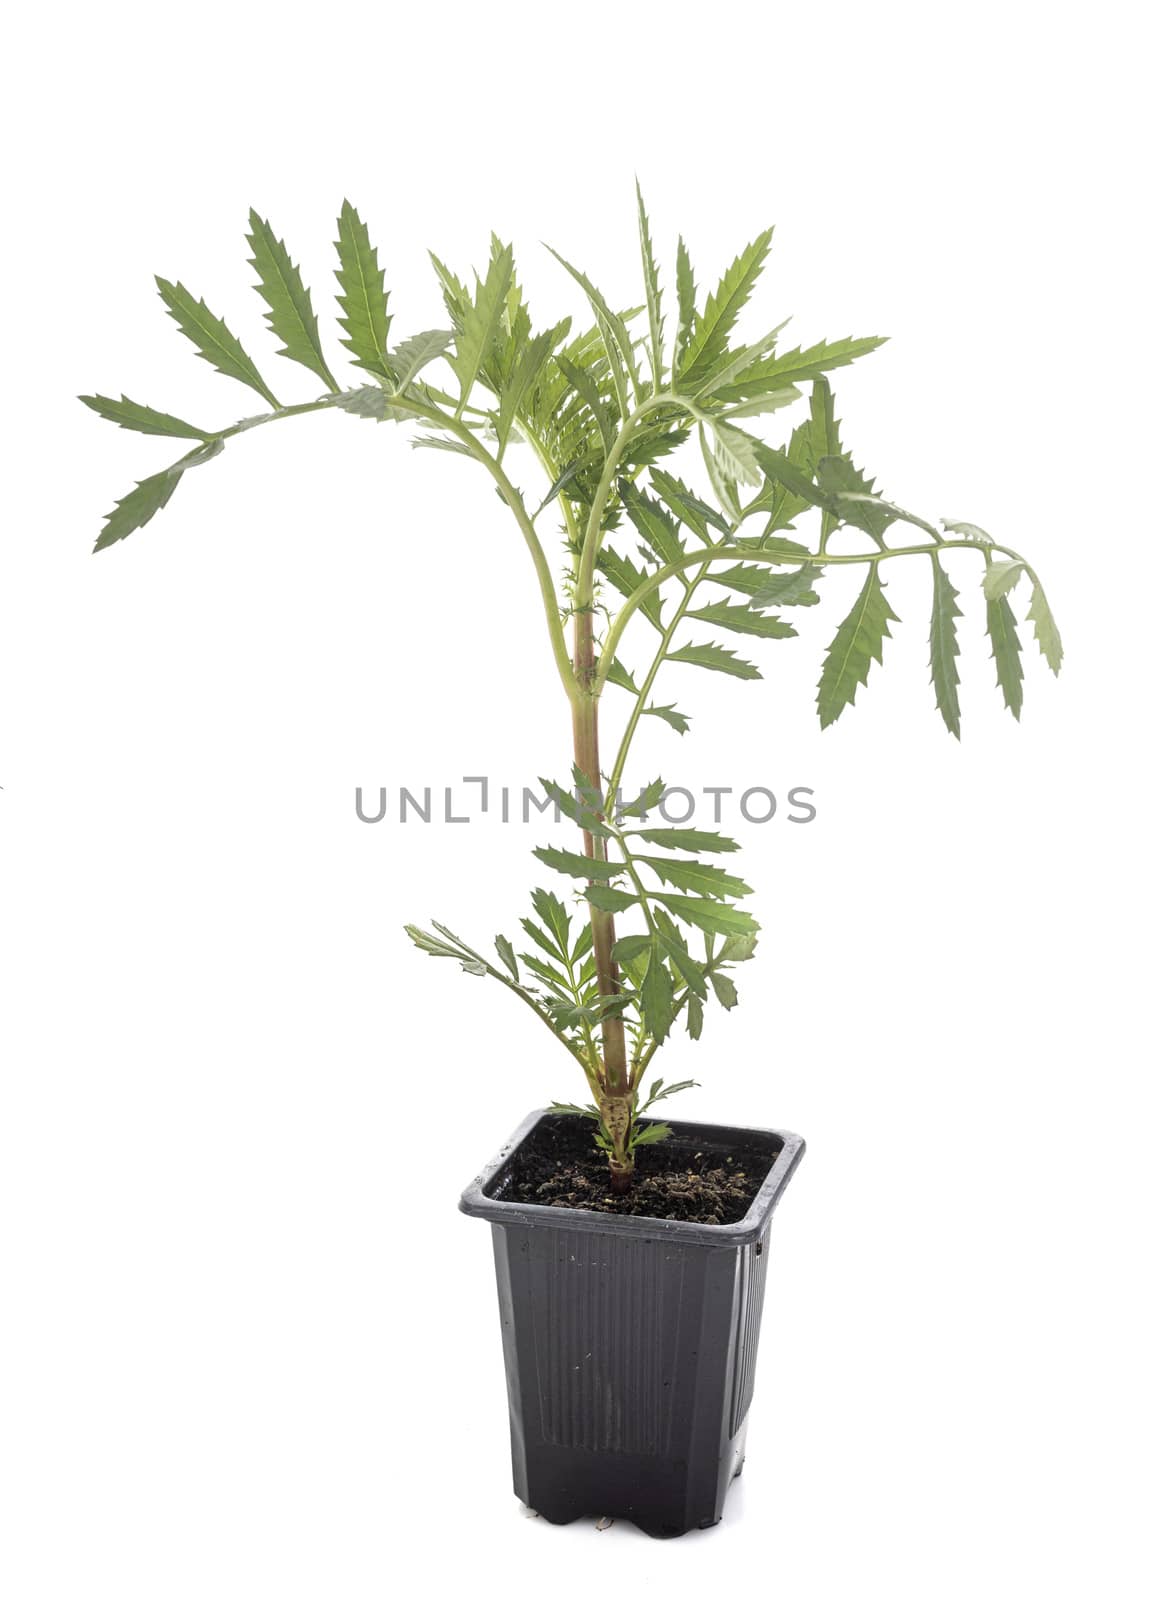 Tagetes patula in front of white background